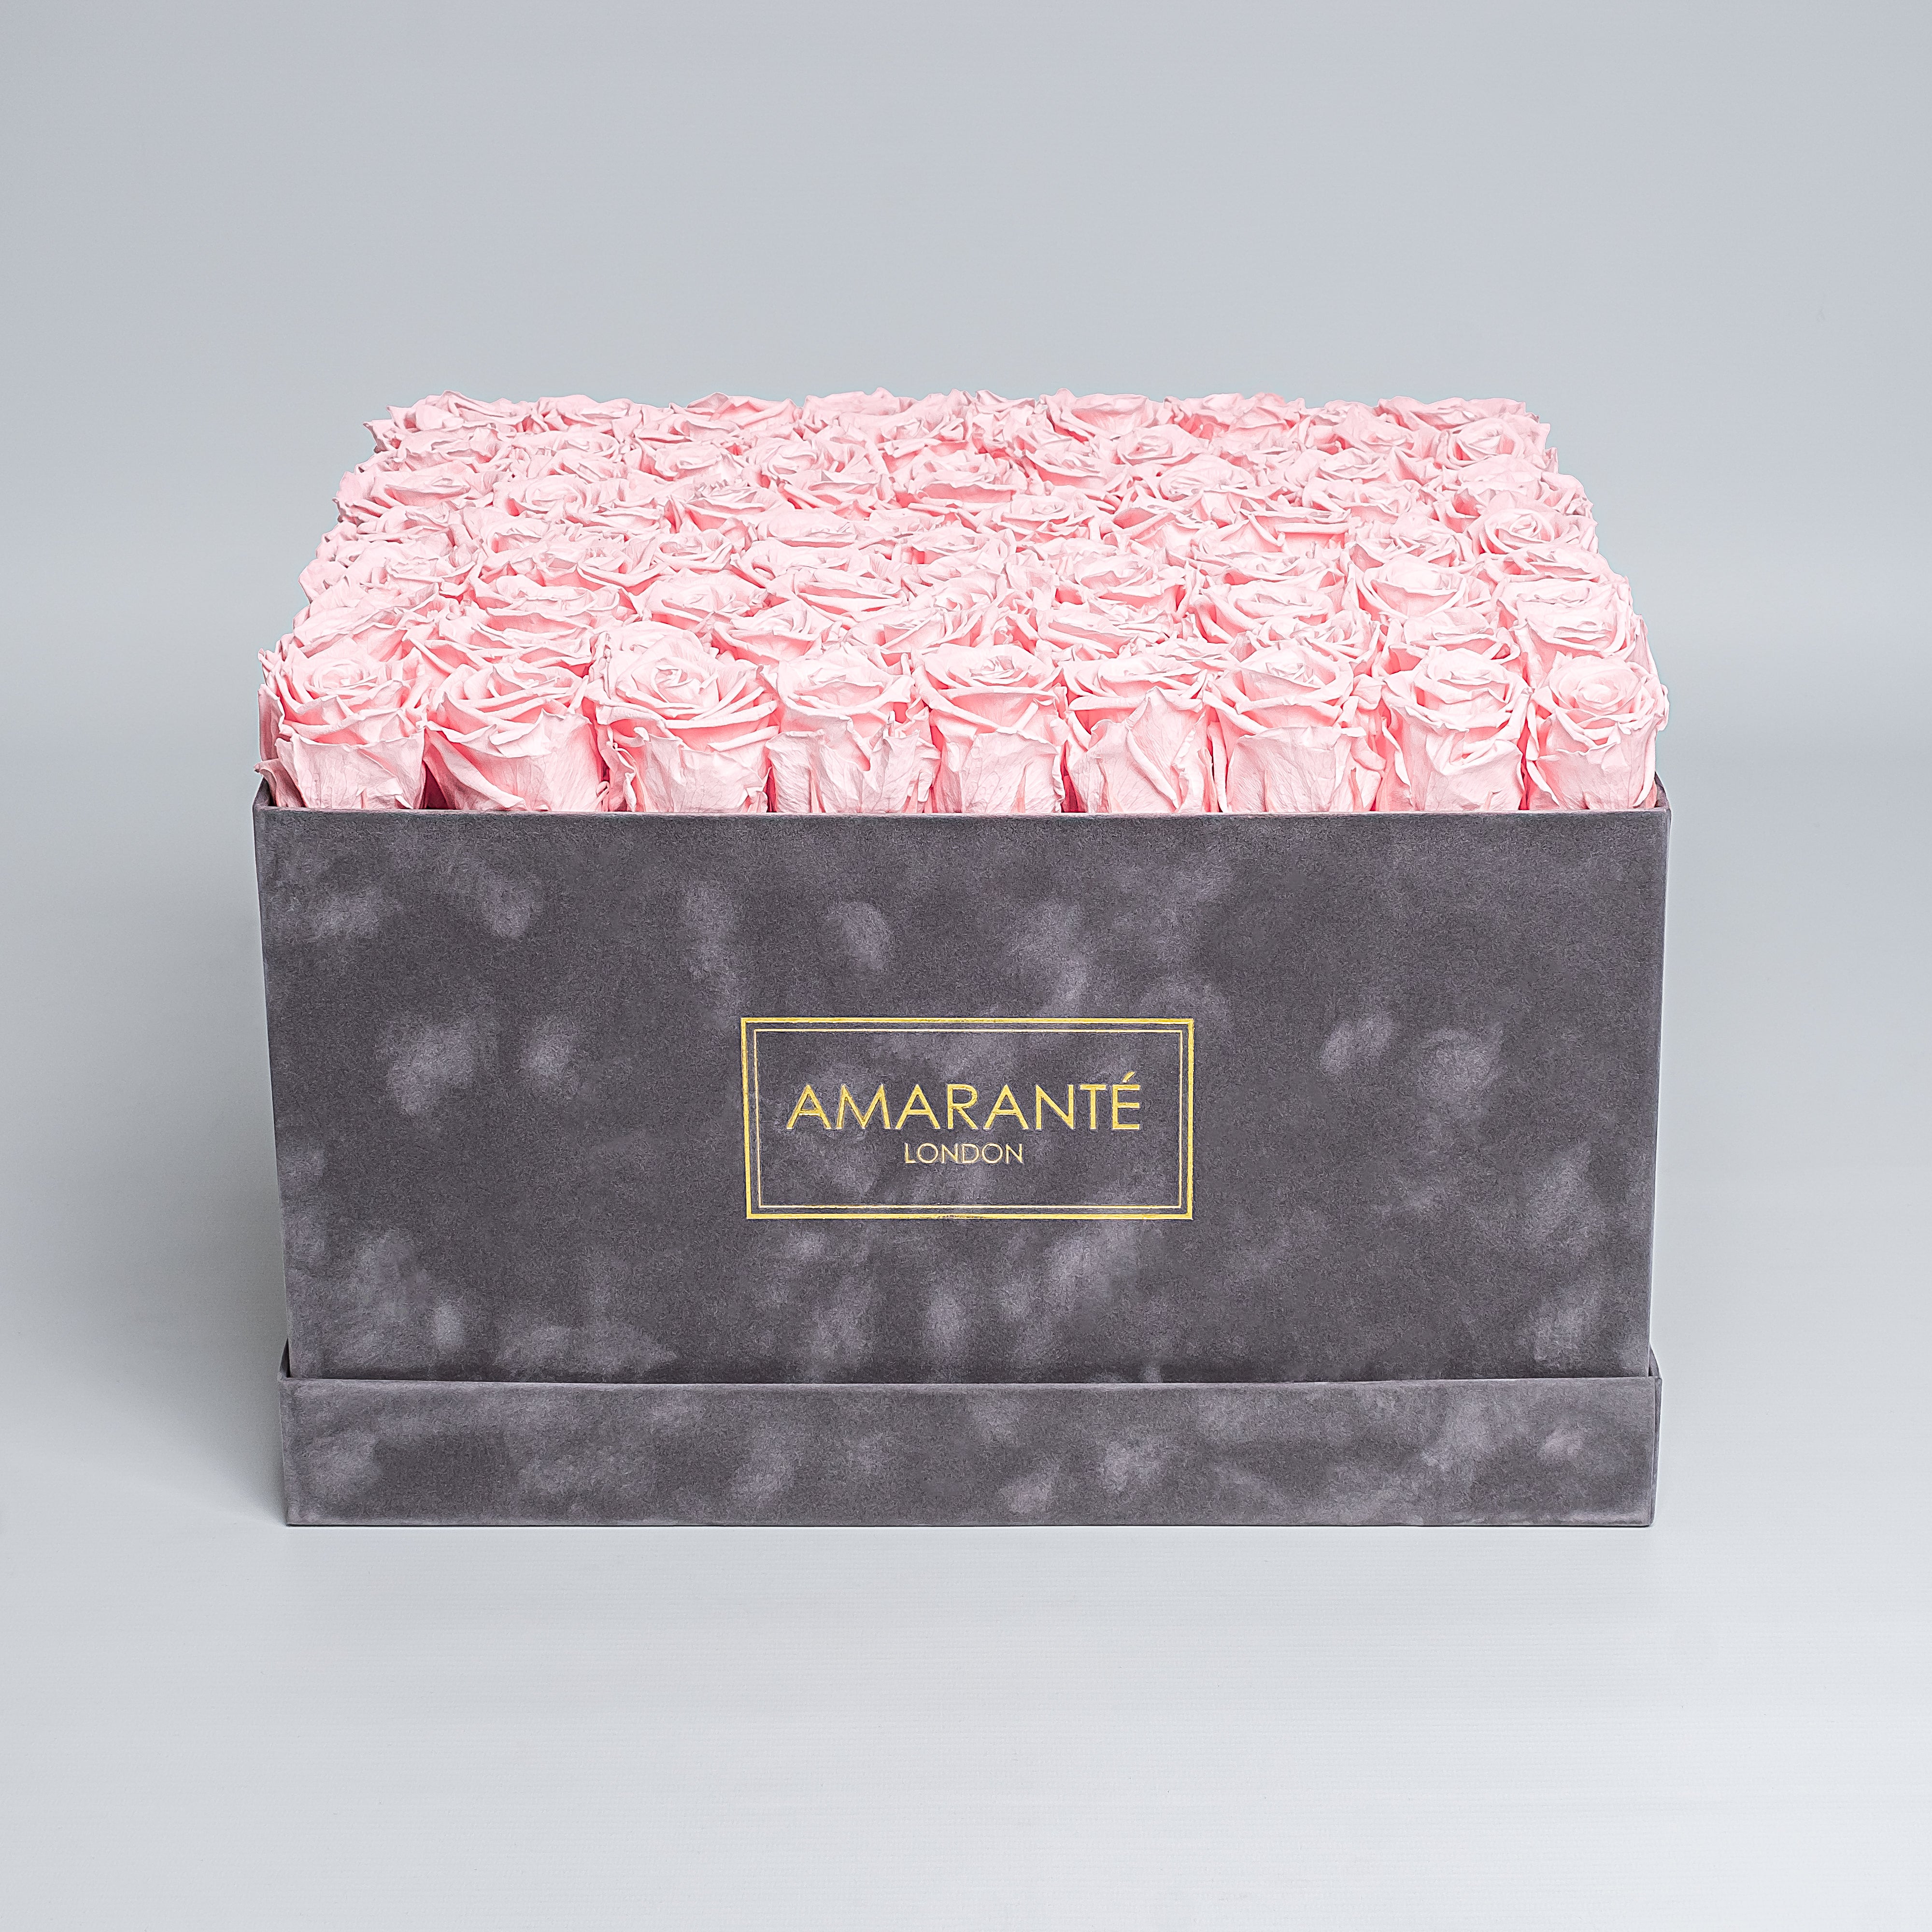 Experience elegance with our 16"x16" extra large grey hatbox, filled with large light-pink forever roses. A luxurious gift of love with free UK delivery, roses customisable in 14 pastel tones.